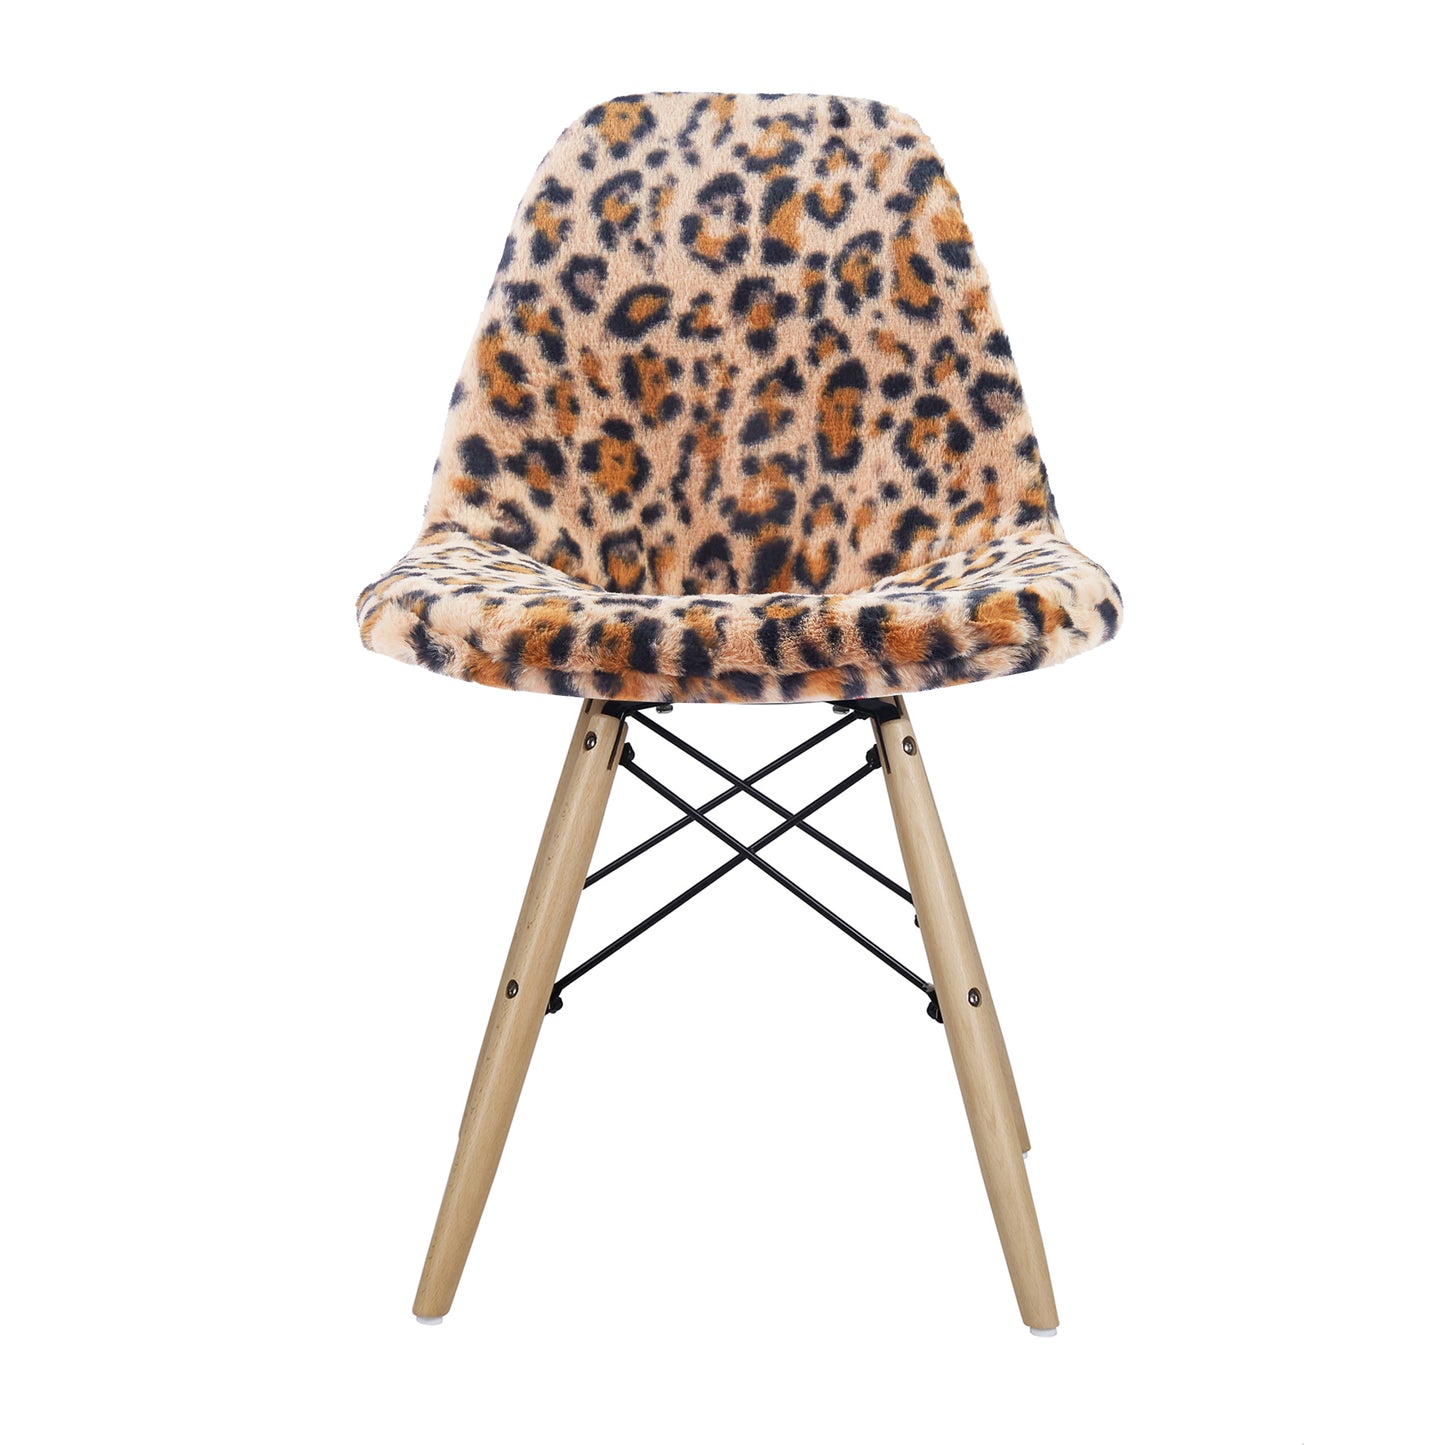 Leopard Fur Side Chair With Wooden Leg